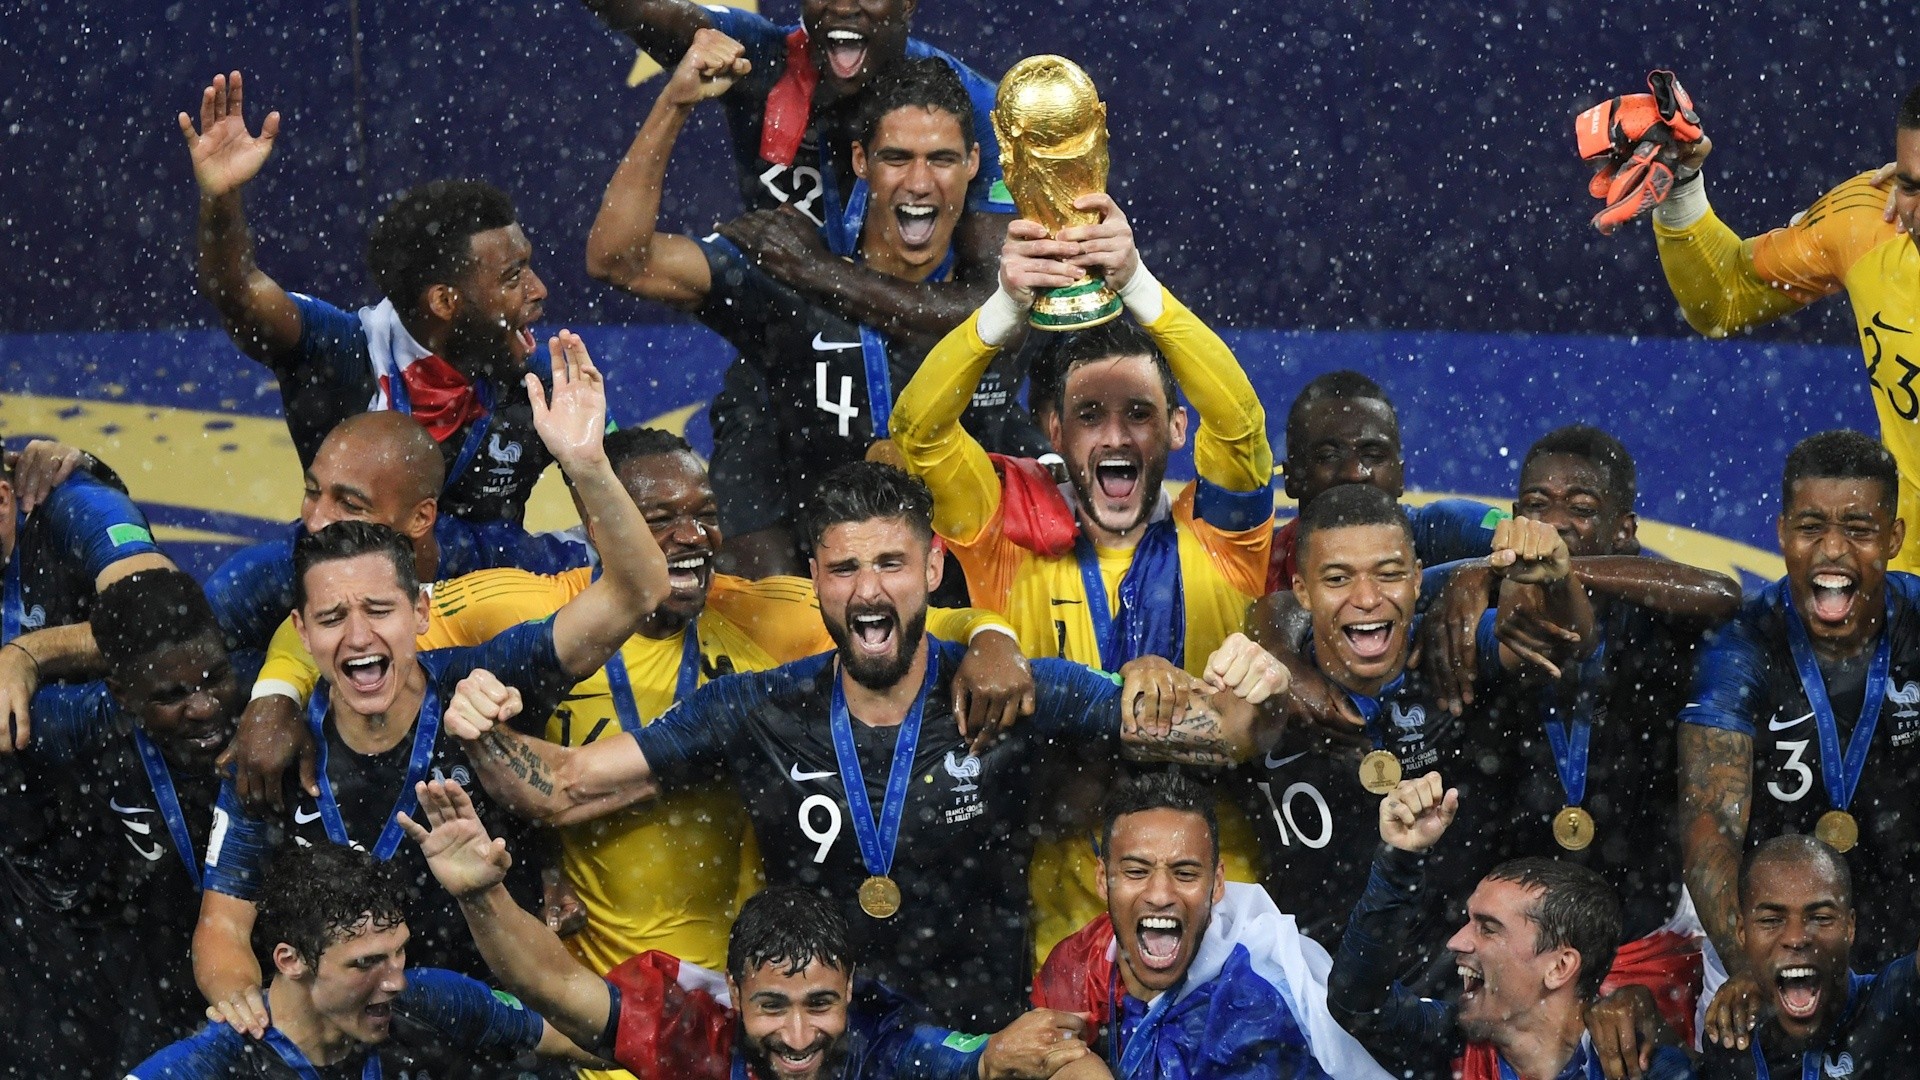 How have defending champions fared in FIFA World Cup history?